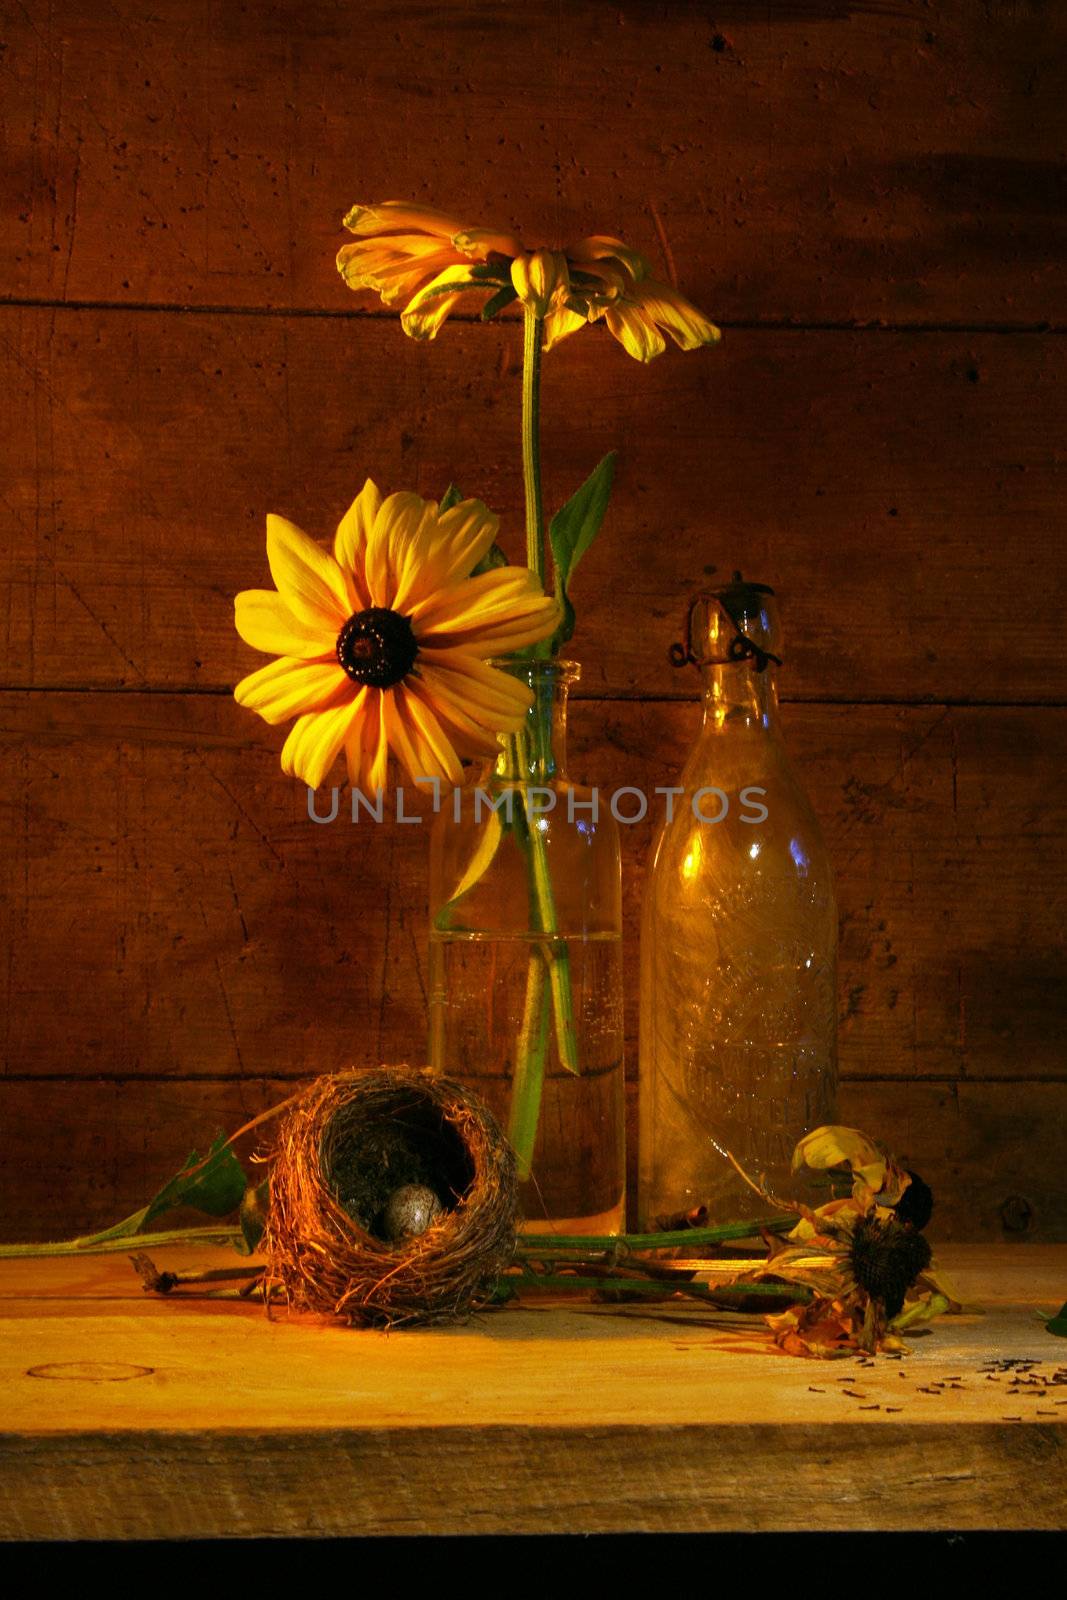 Yellow flower still life by Sandralise